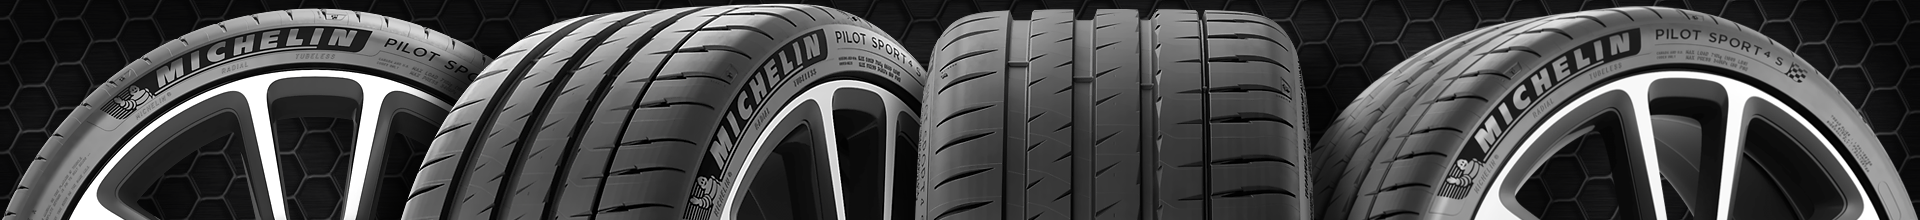 255 40 19 discount tires from Tire Outlet US